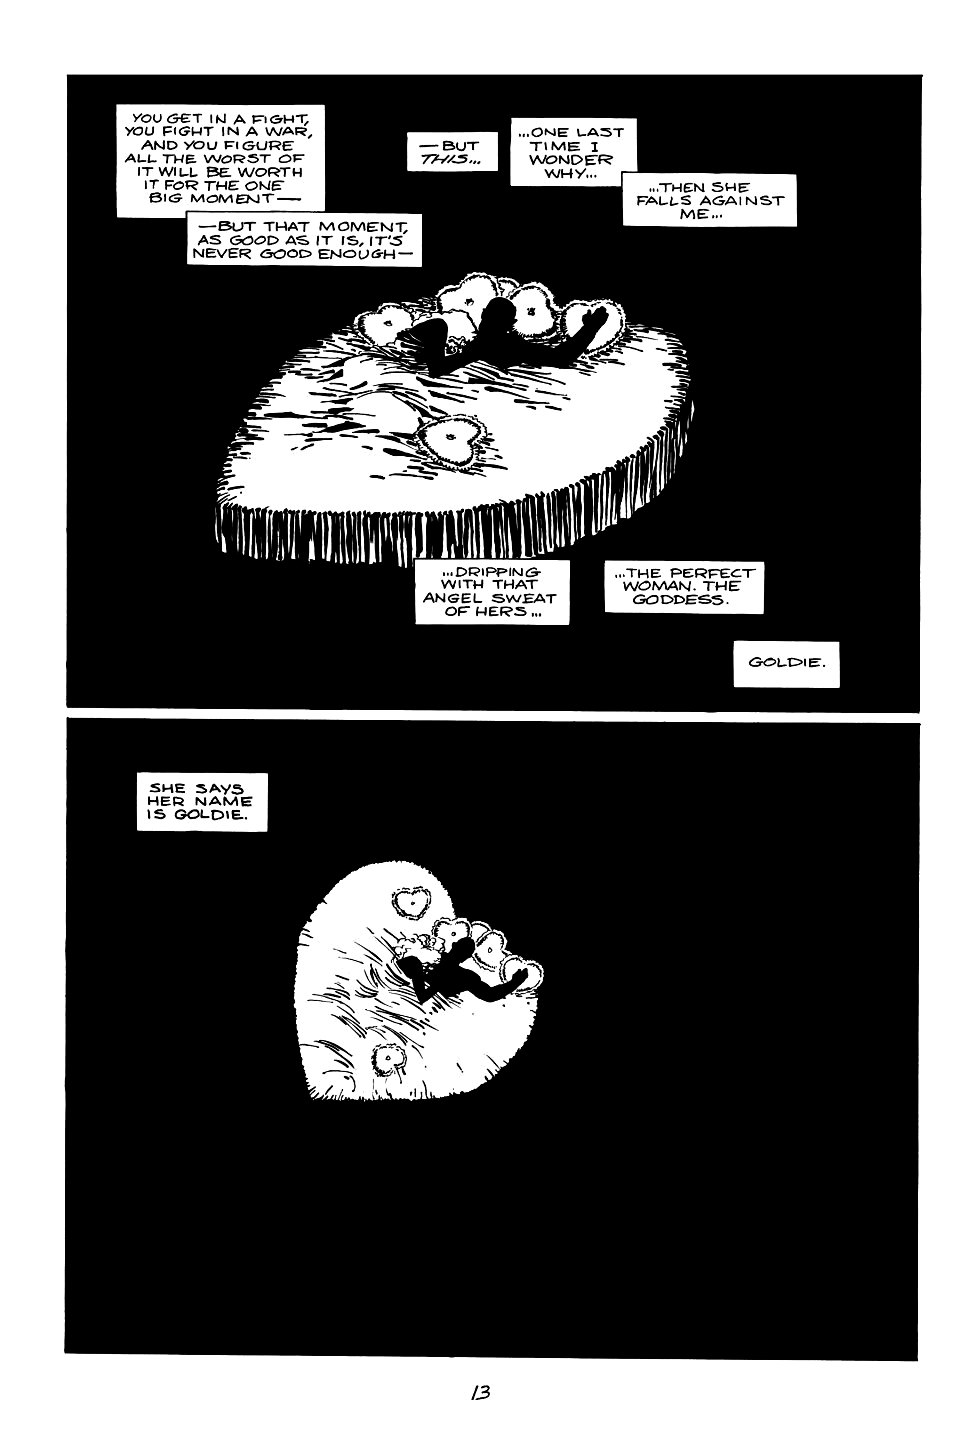 page 13 of sin city 1 the hard goodbye